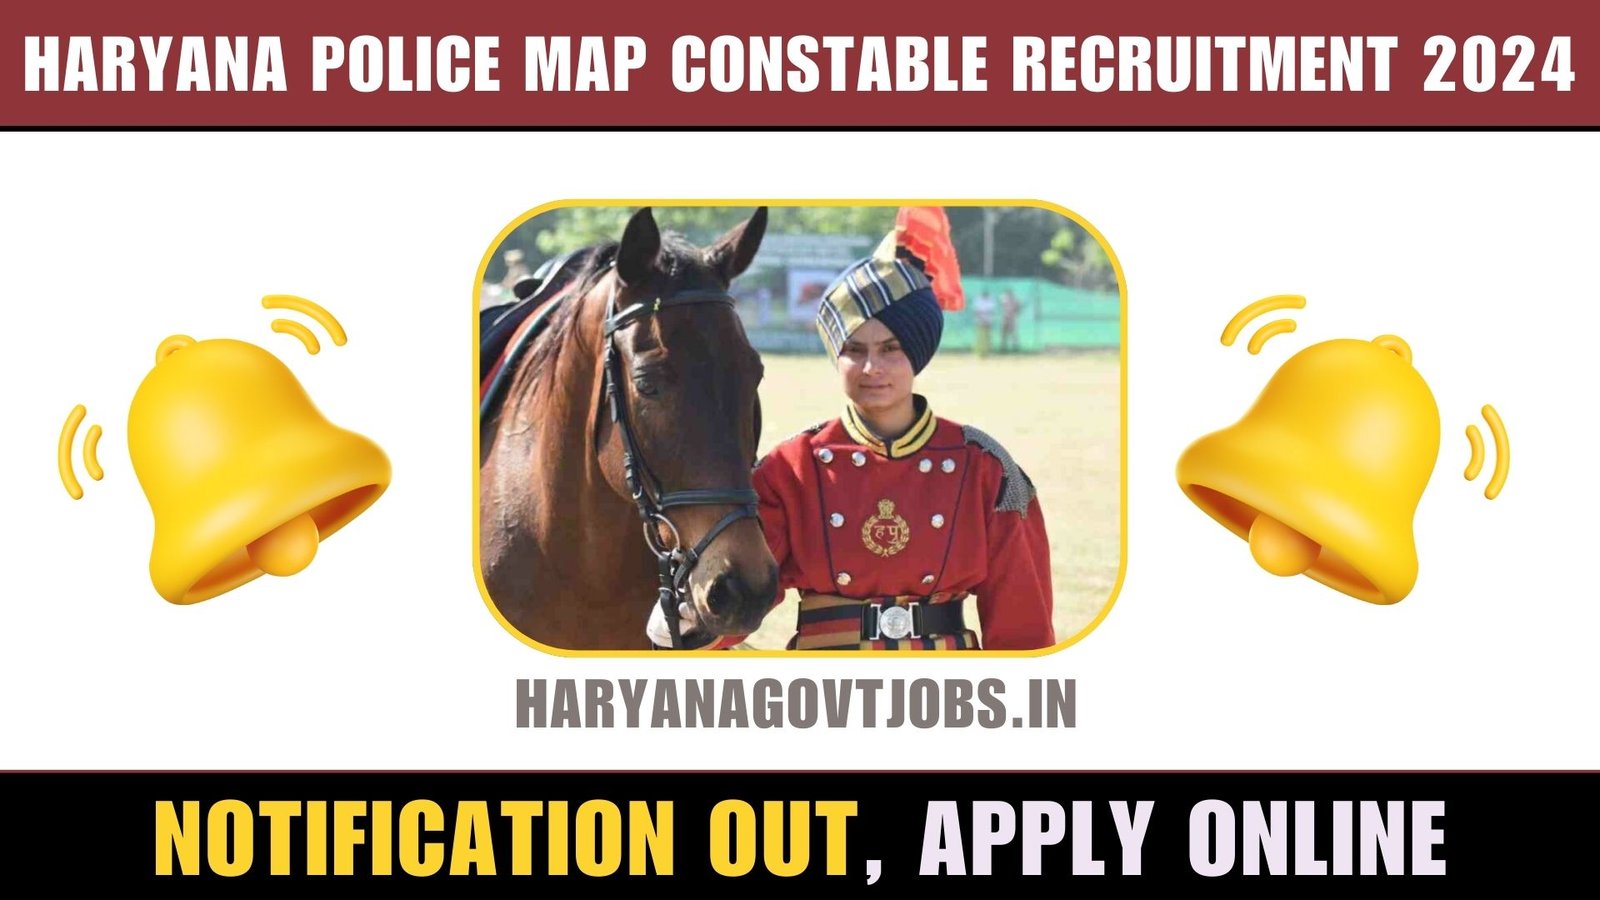 Haryana Police MAP Constable Recruitment 2024 Overview